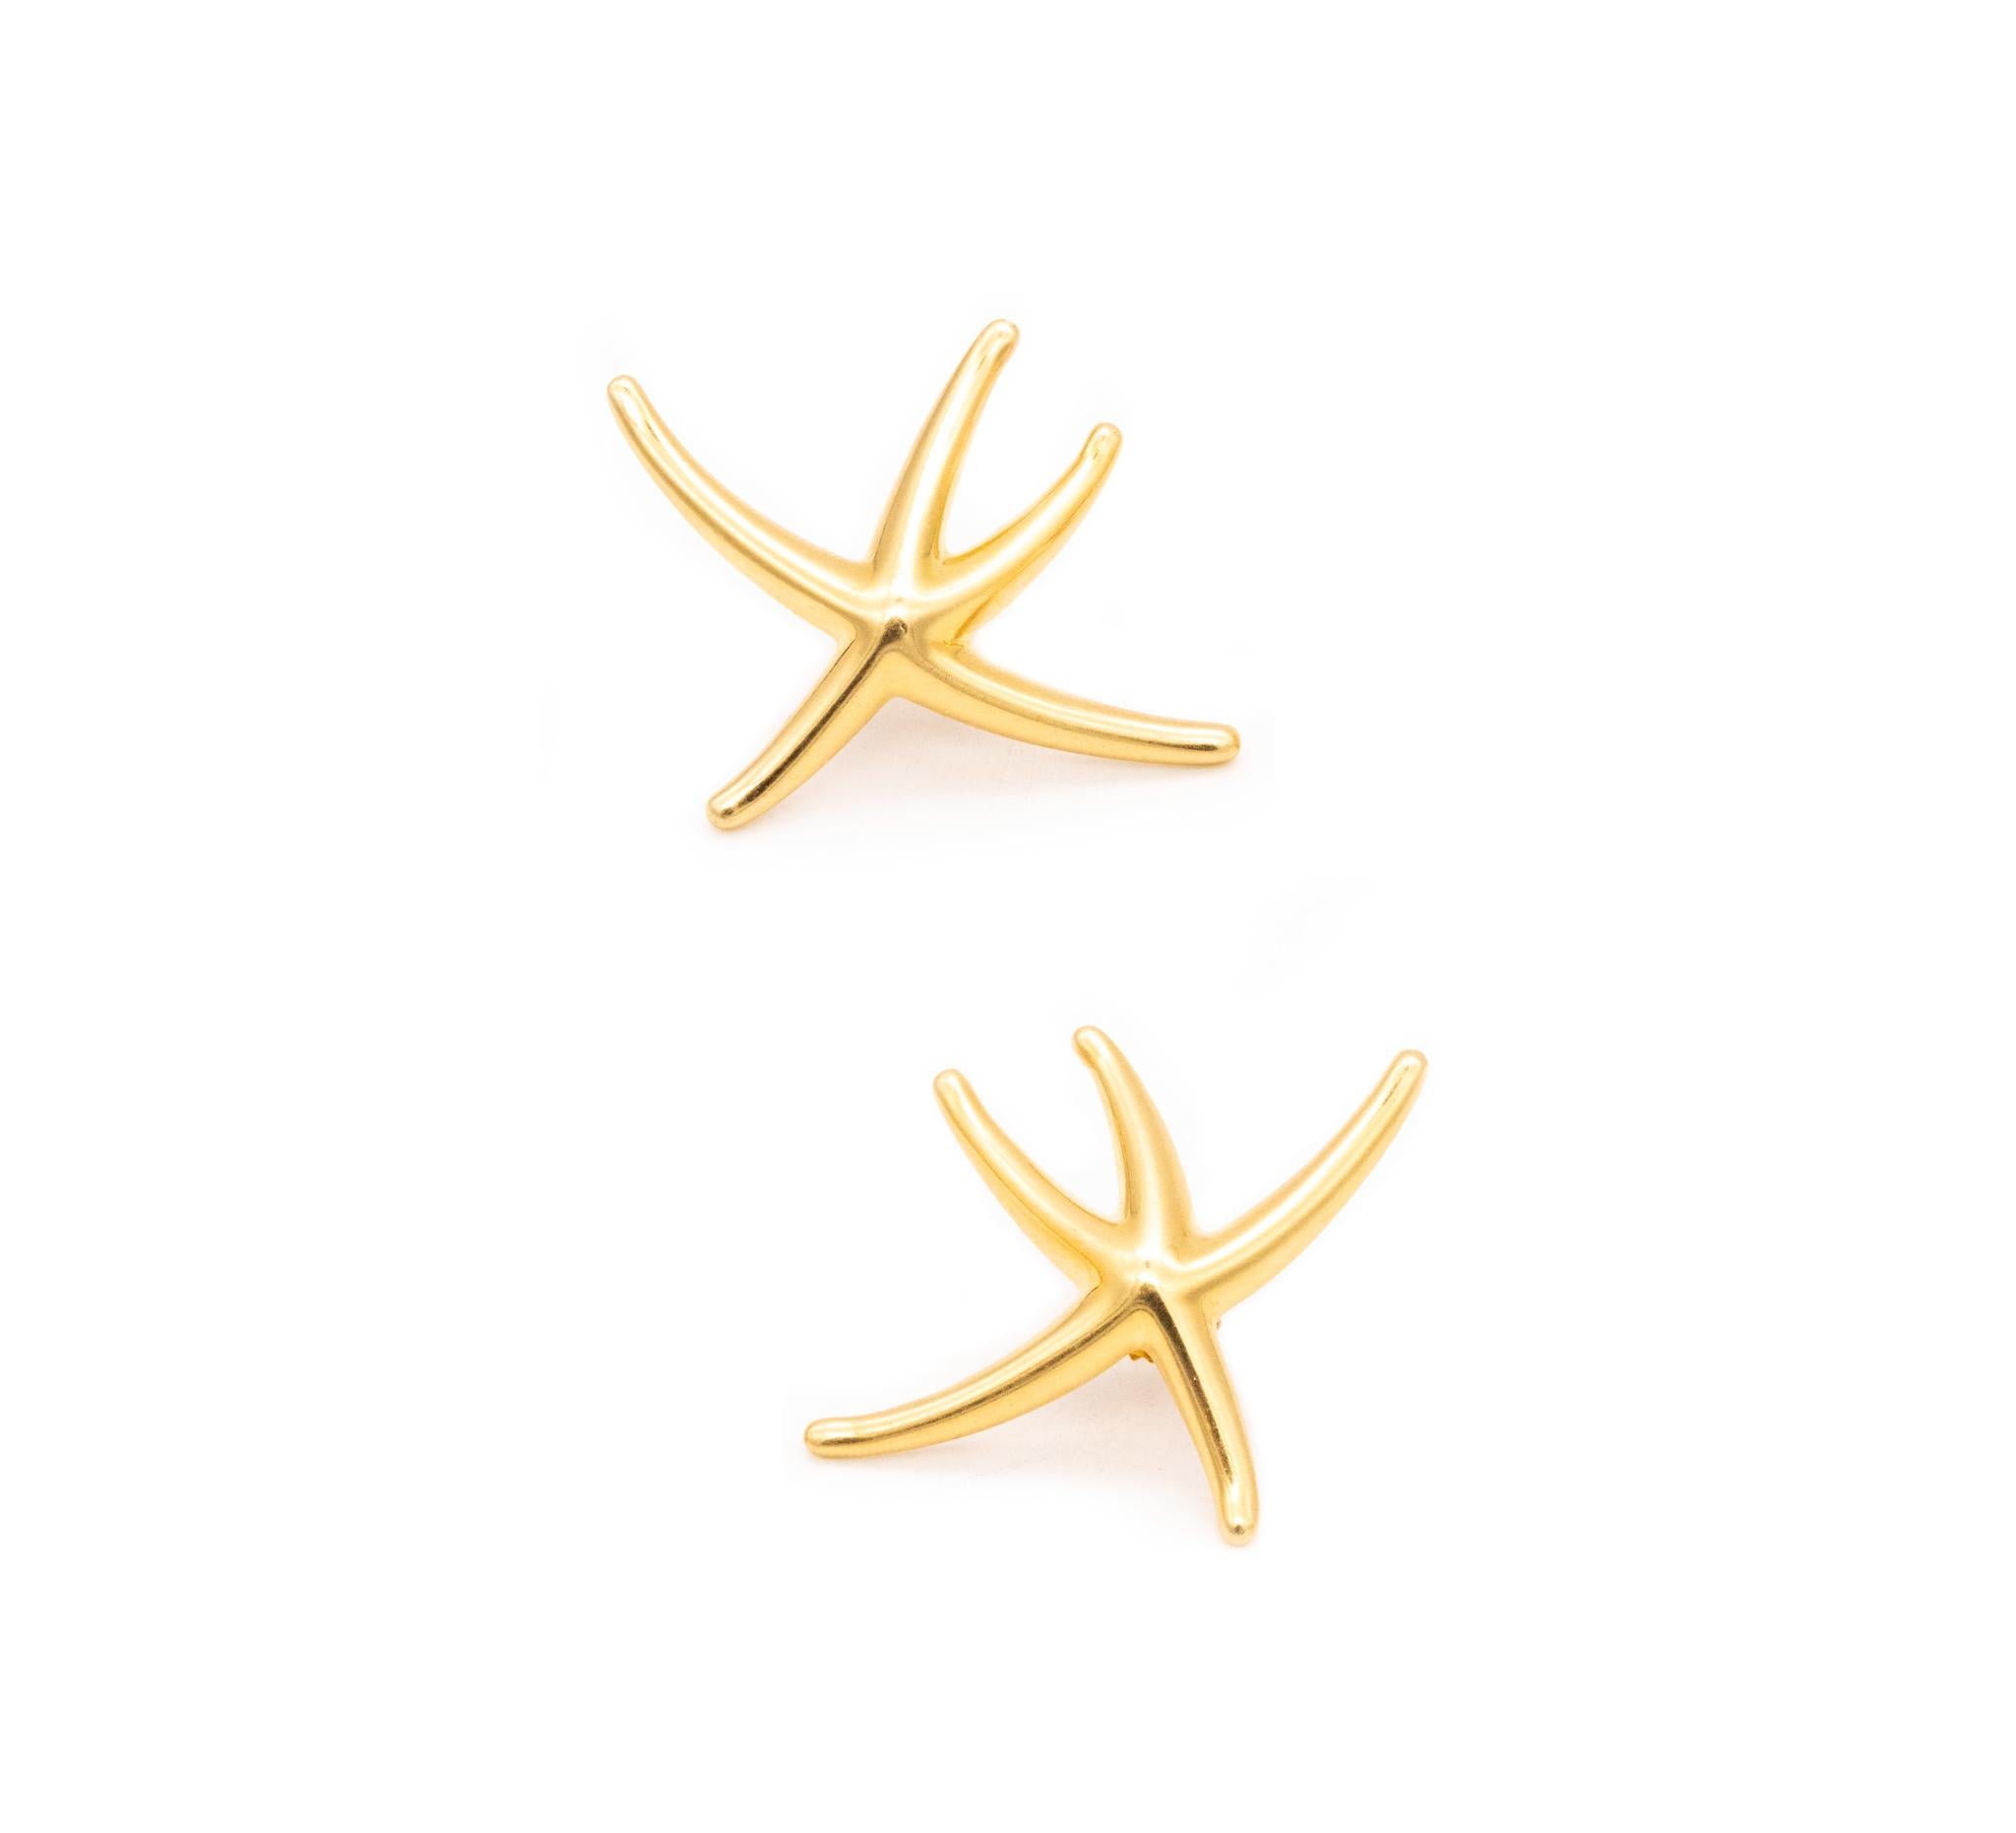 Modernist Tiffany Co. 1980 New York by Elsa Peretti Starfish Earrings in 18kt Yellow Gold